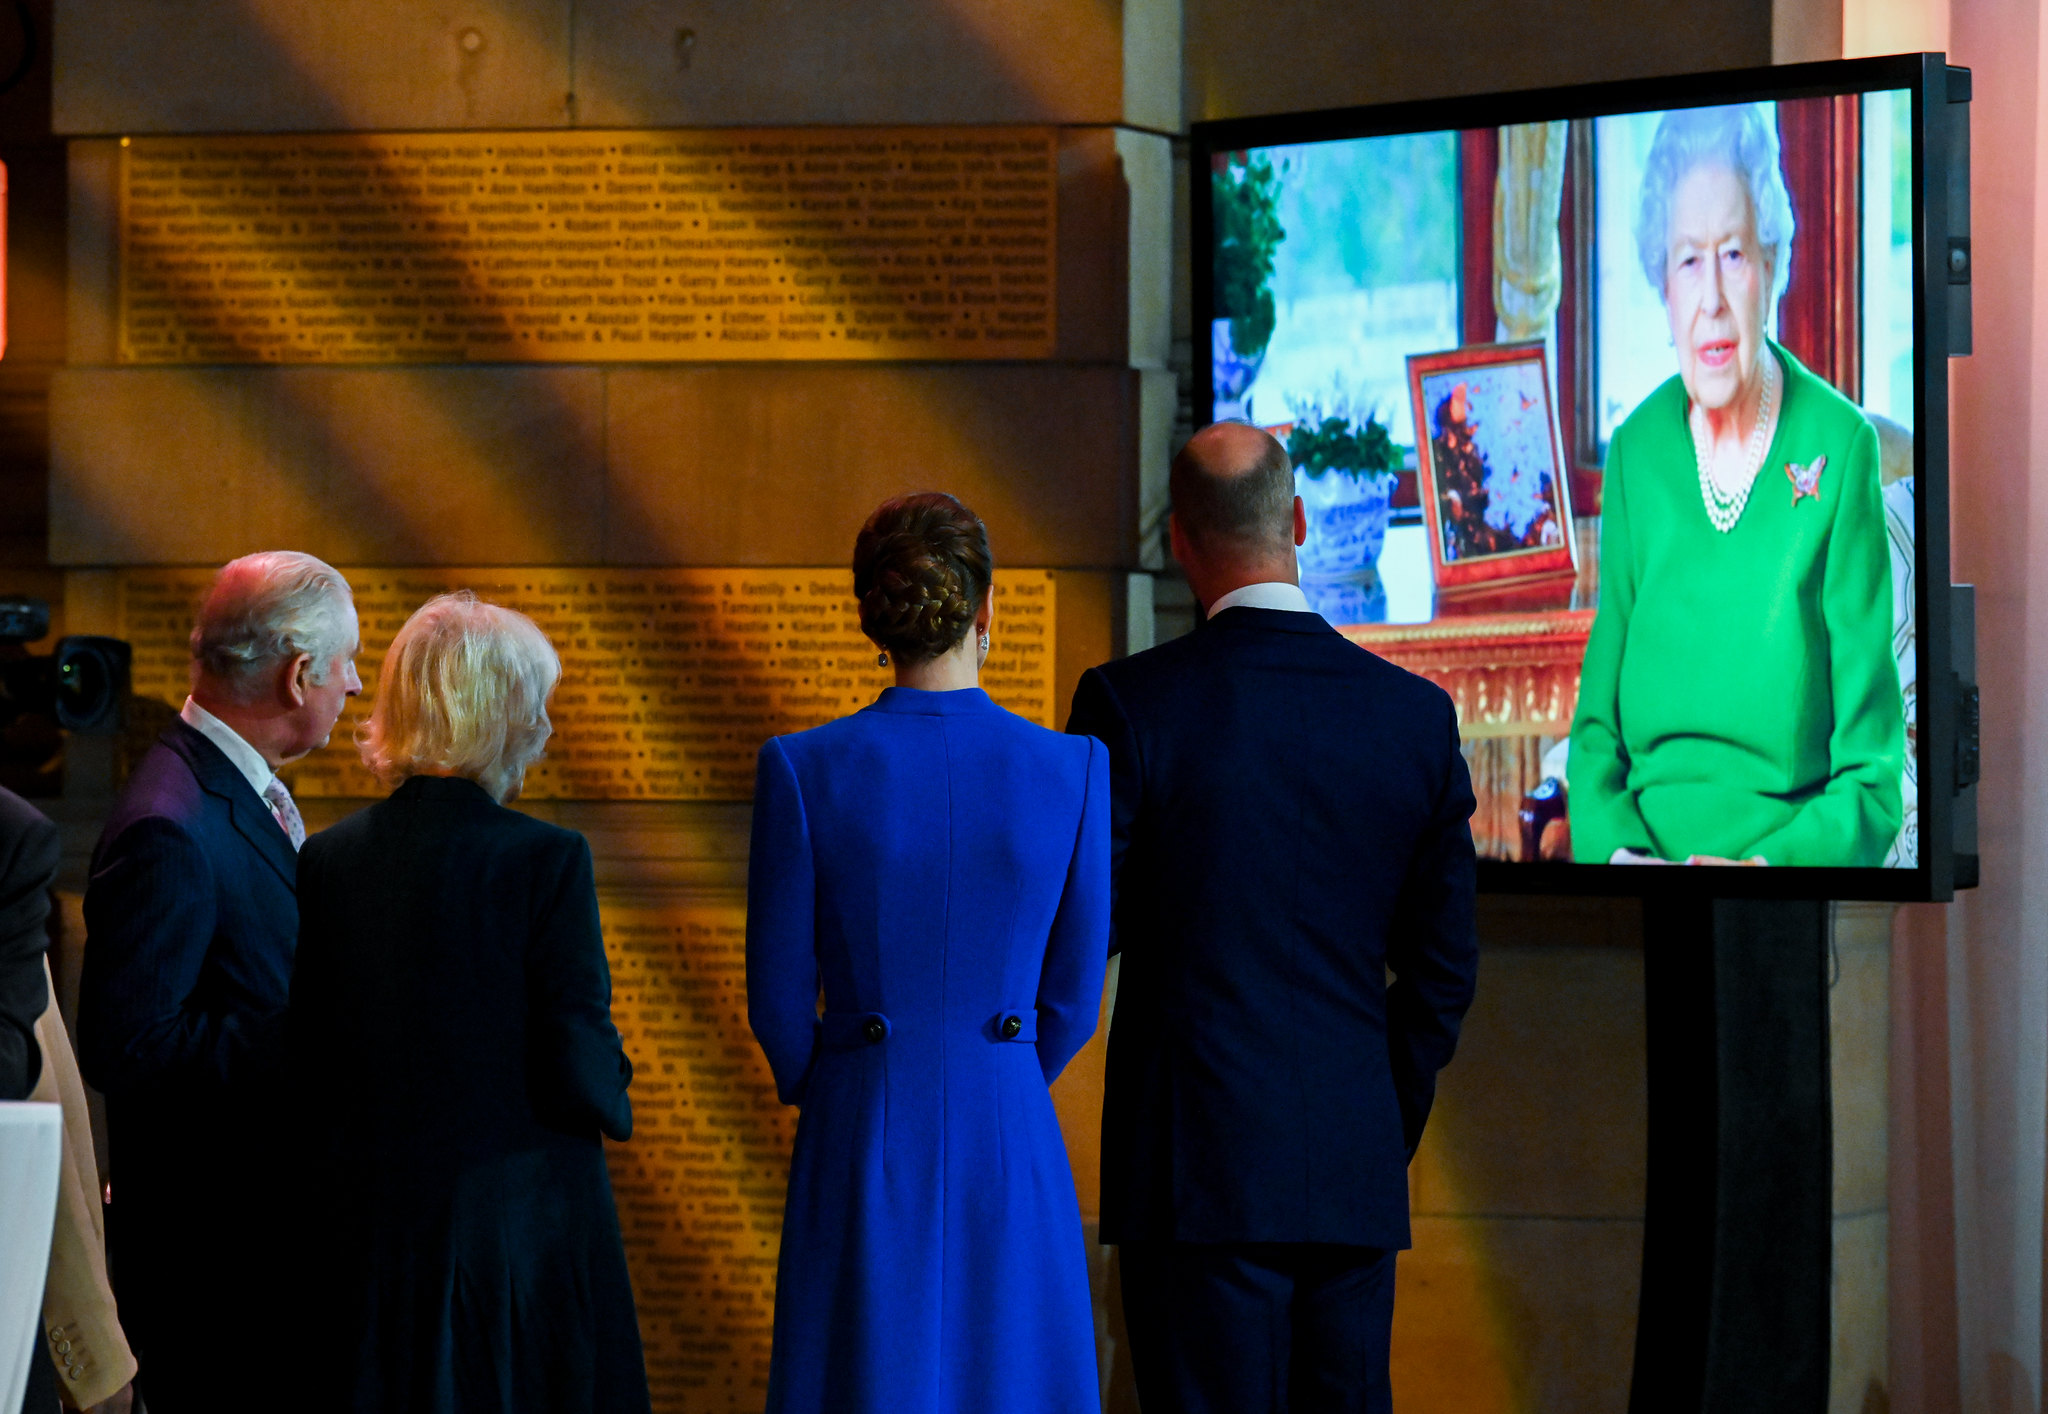 Charles, Prince of Wales, Camilla, Duchess or Cornwall, Catherine, Duchess of Cambridge and William, Duke of Cambridge, watch Queen Elizabeth II onscreen.